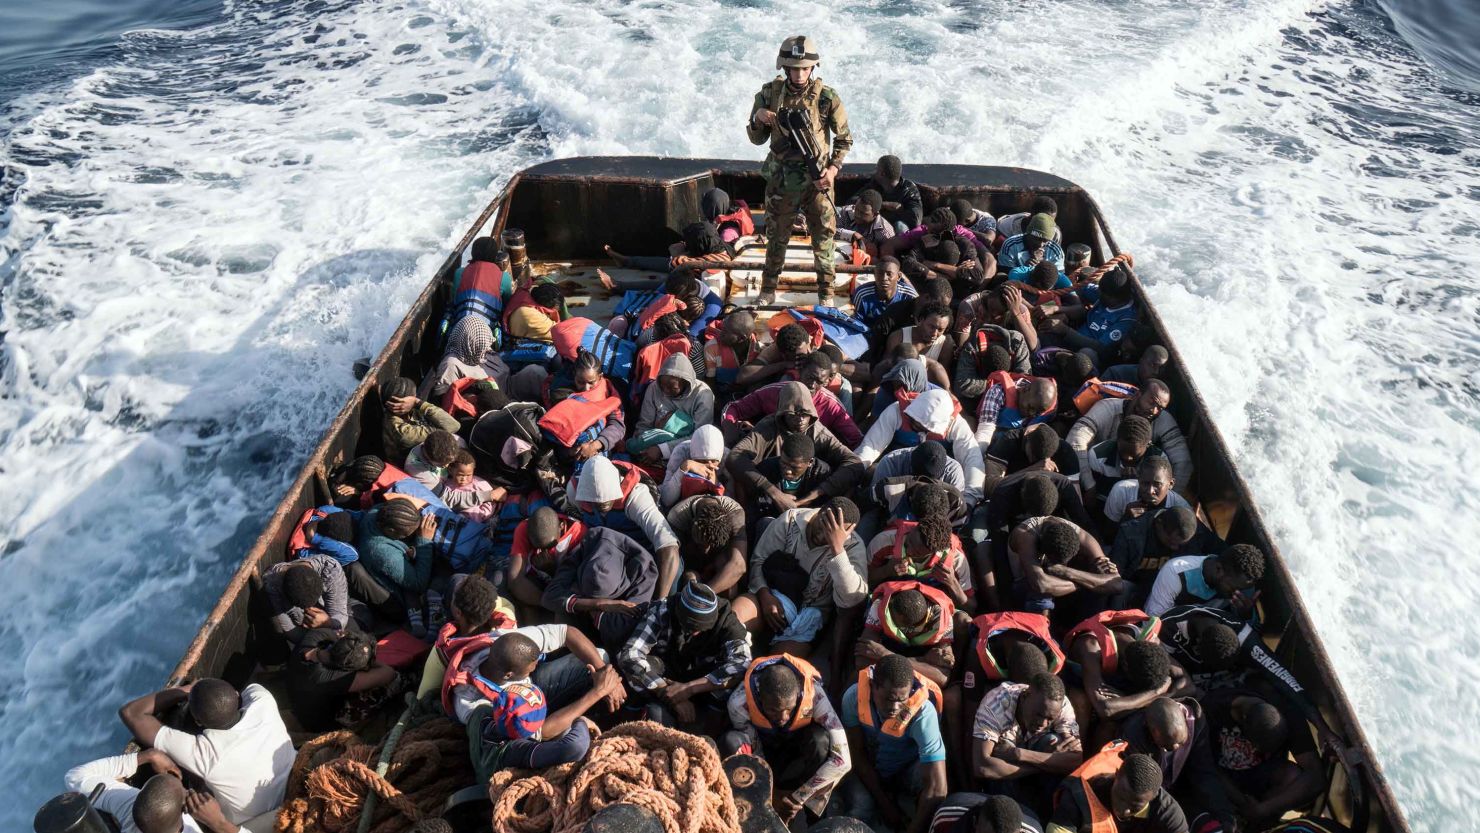 Europe's migrant crisis isn't going away, but it is changing